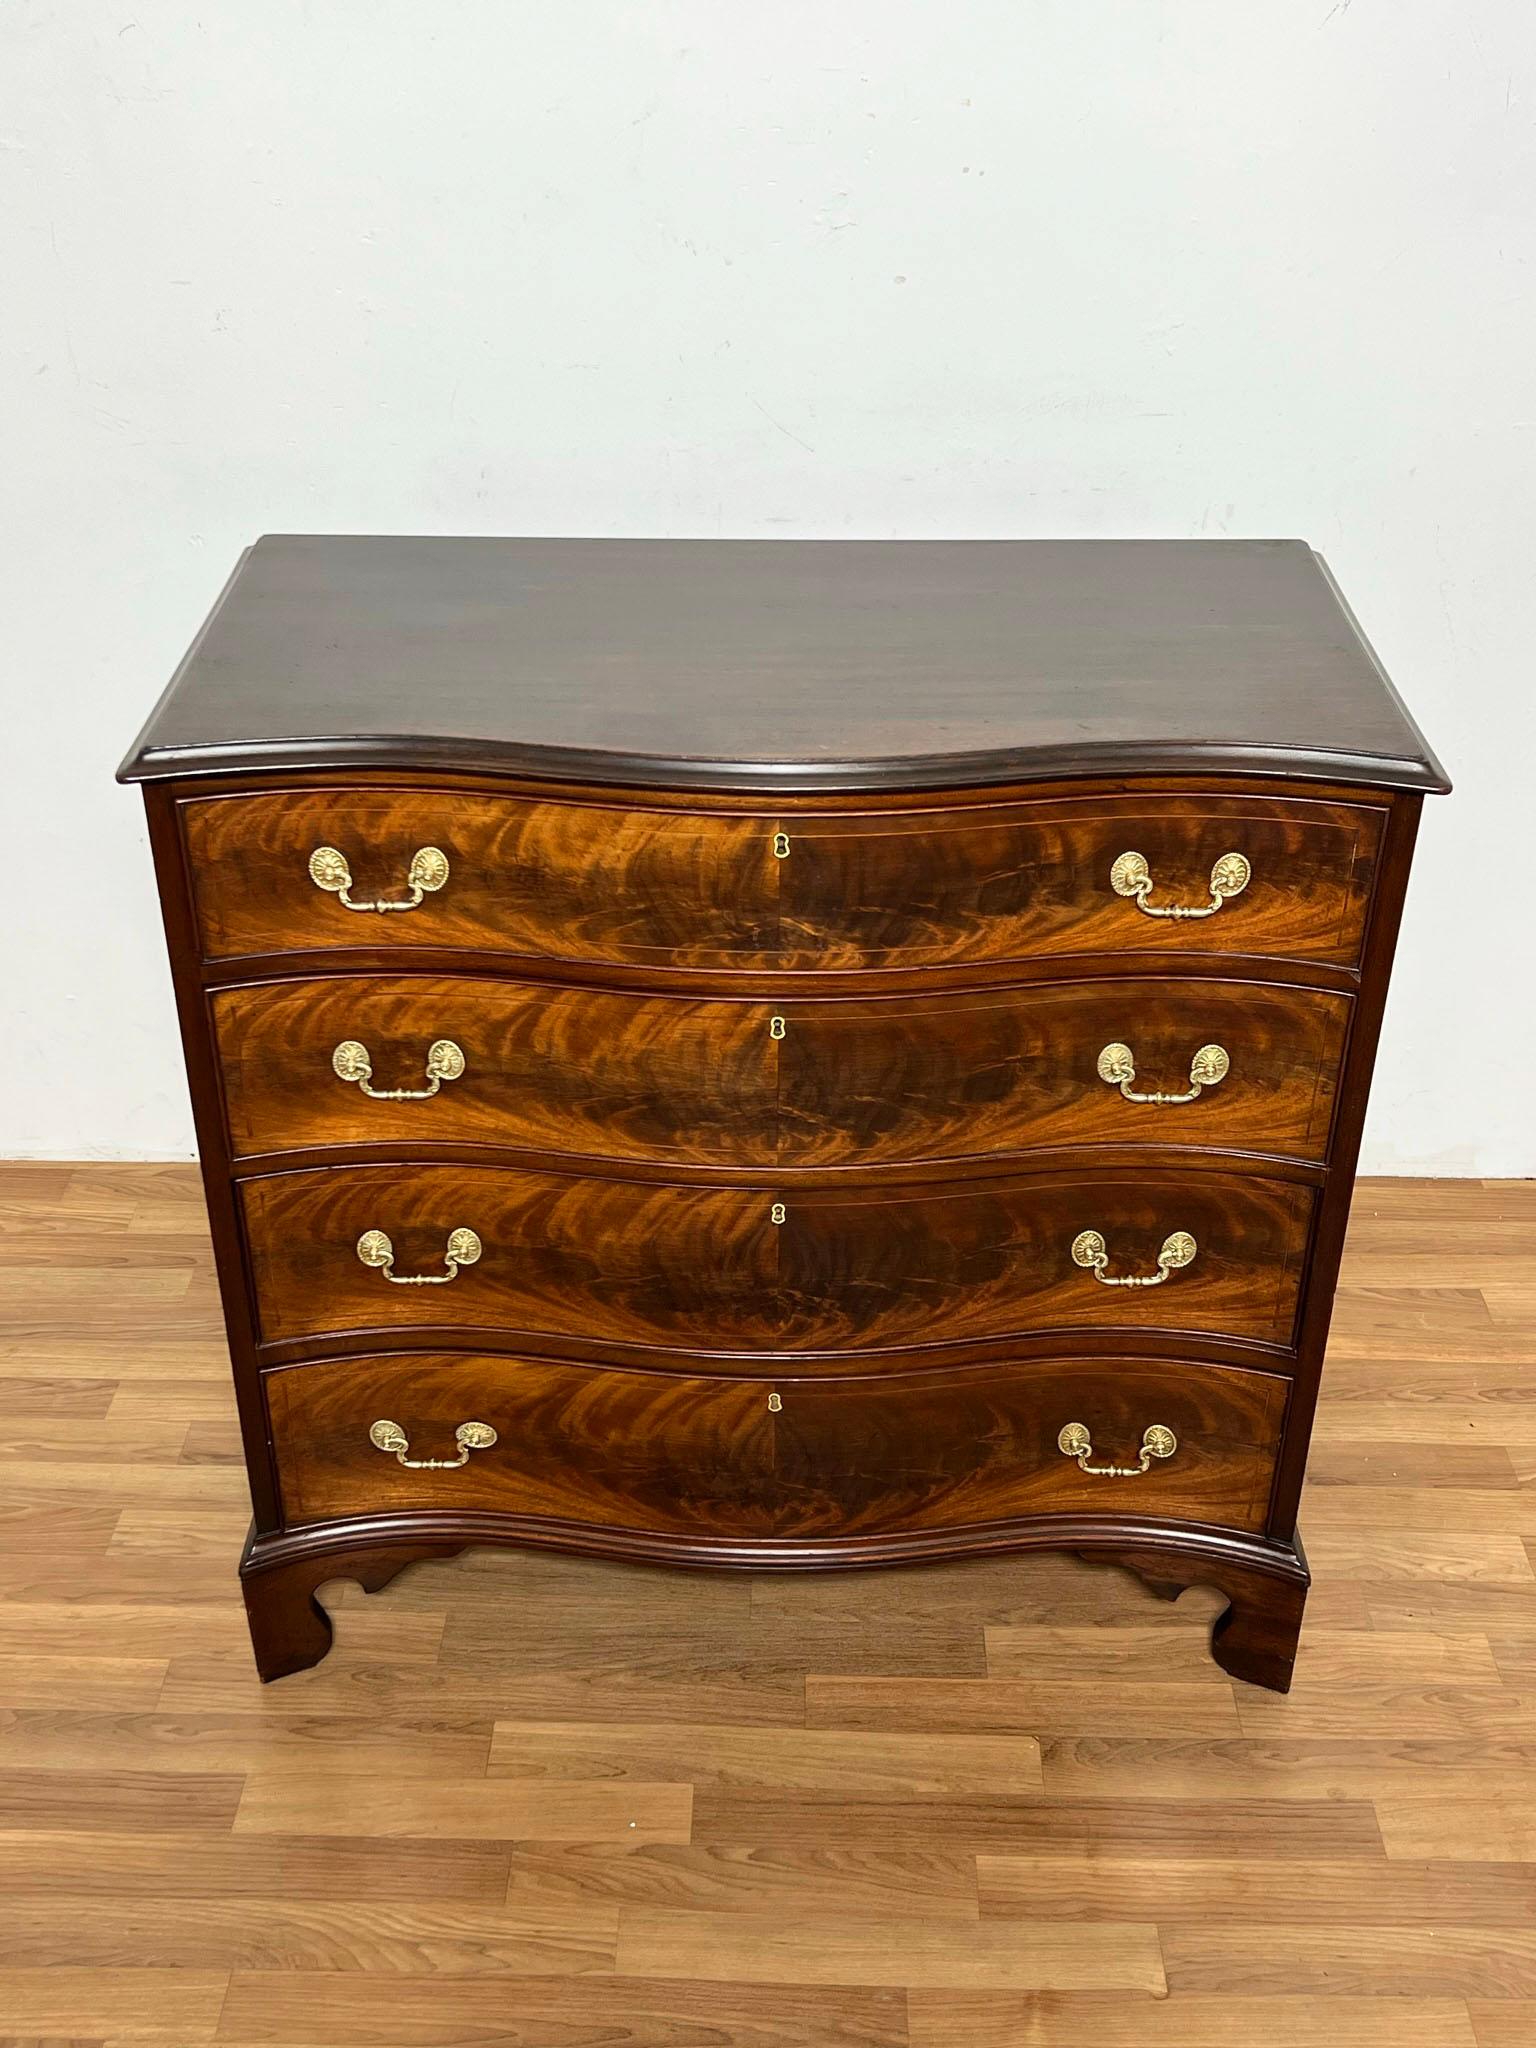 Georgian Antique George III Serpentine Mahogany Chest of Drawers, Ca. 1790s For Sale